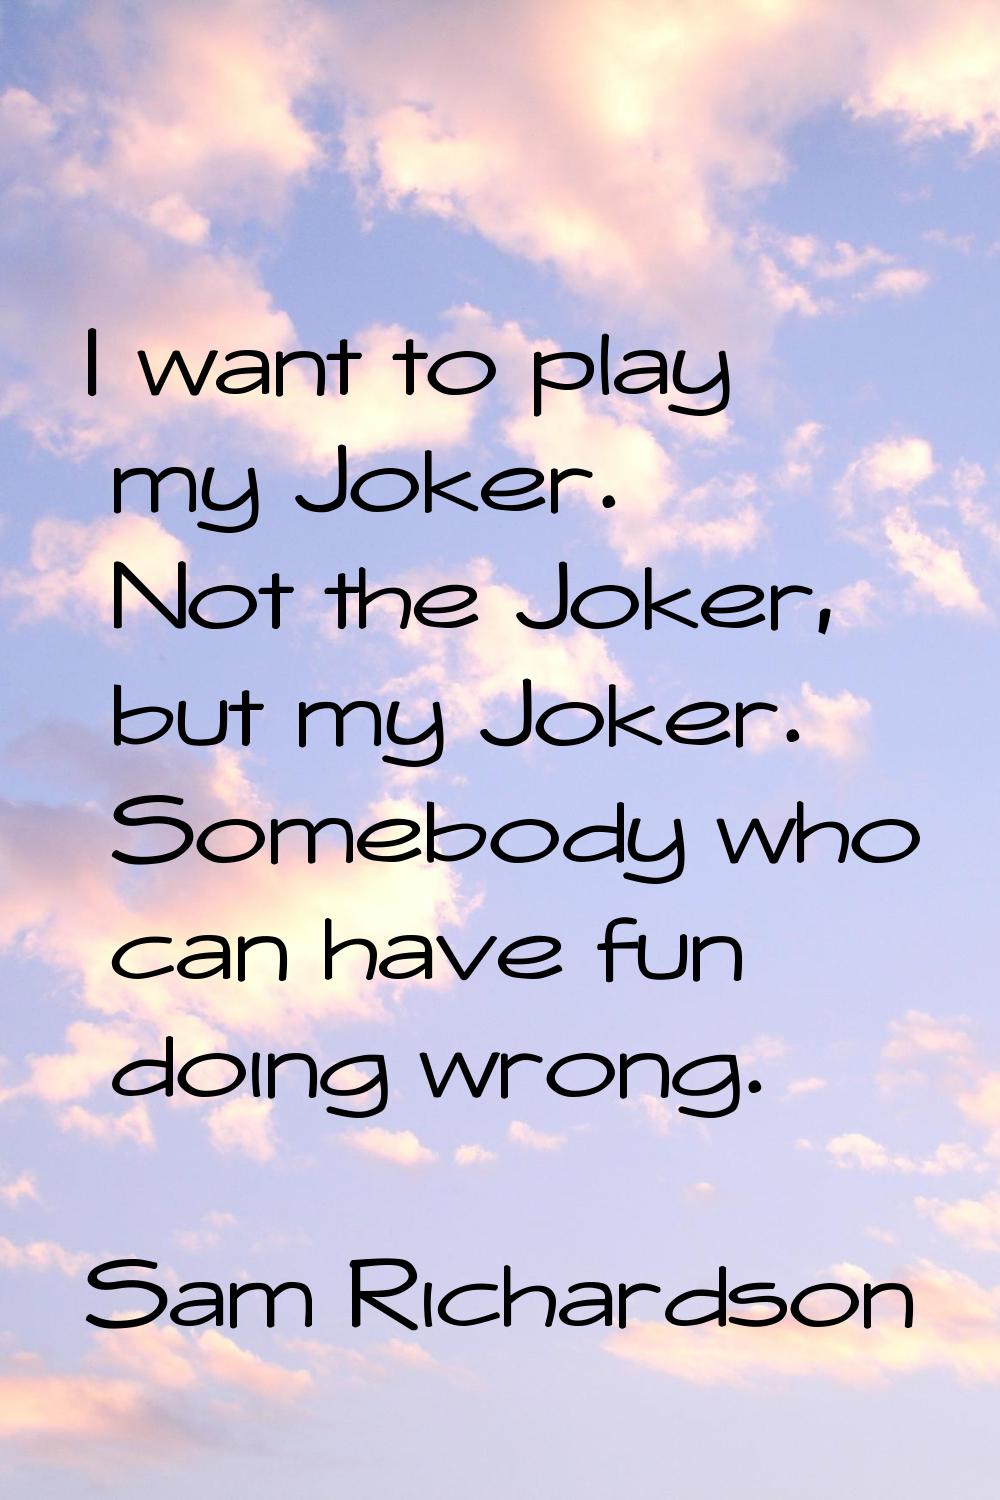 I want to play my Joker. Not the Joker, but my Joker. Somebody who can have fun doing wrong.